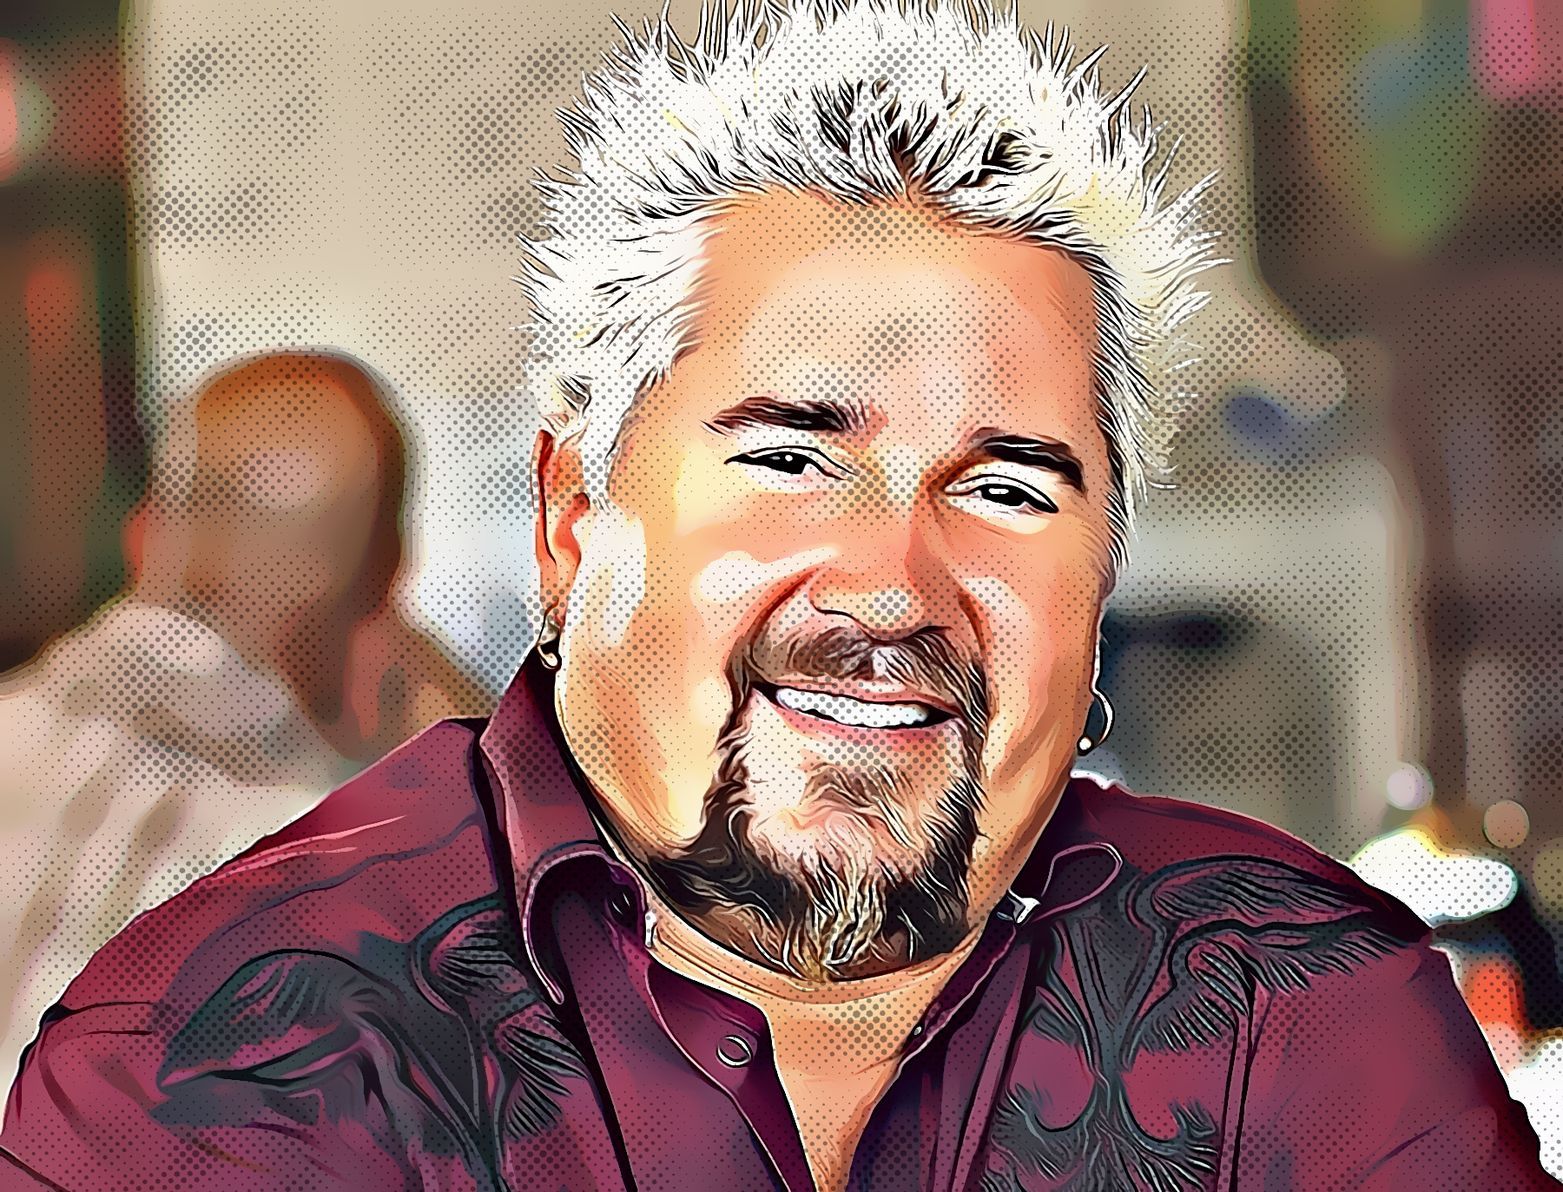 Guy Fieri : NFT Painting The FlavorTown Chef is Making Waves and Tasty Bites - DDD